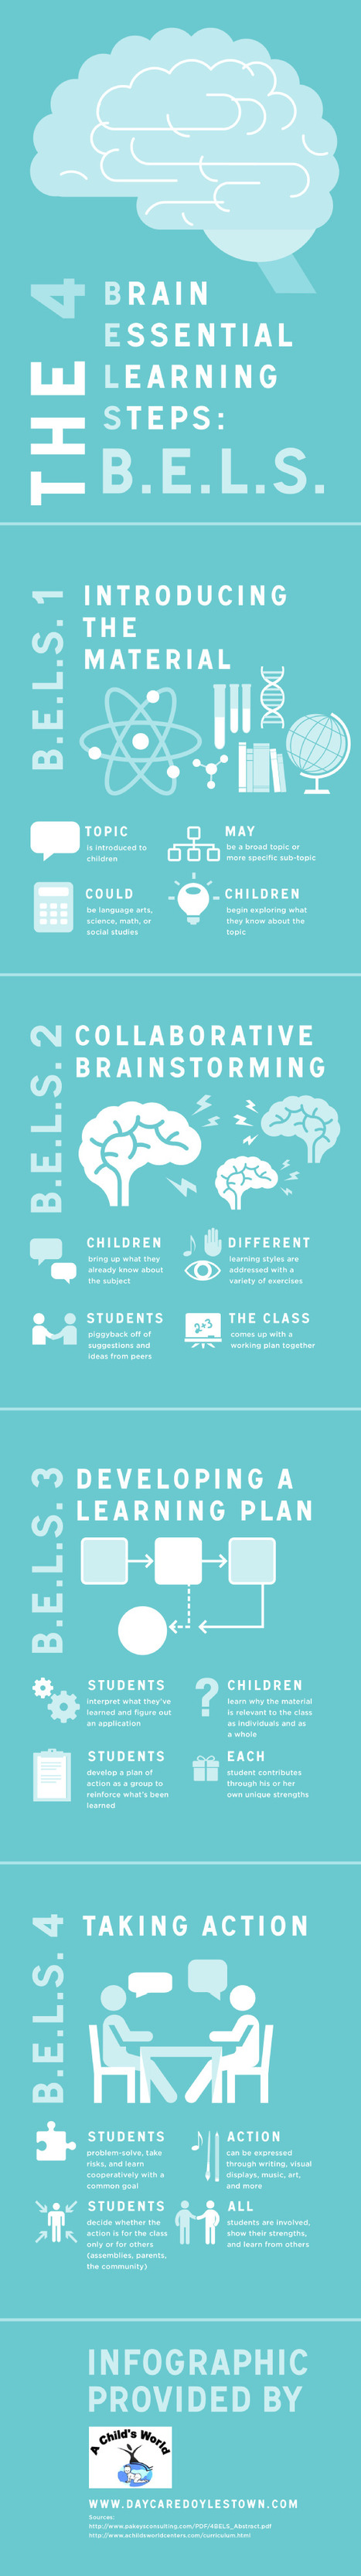 The 4 Brain Essential Learning Steps [Infographic] | 21st Century Learning and Teaching | Scoop.it